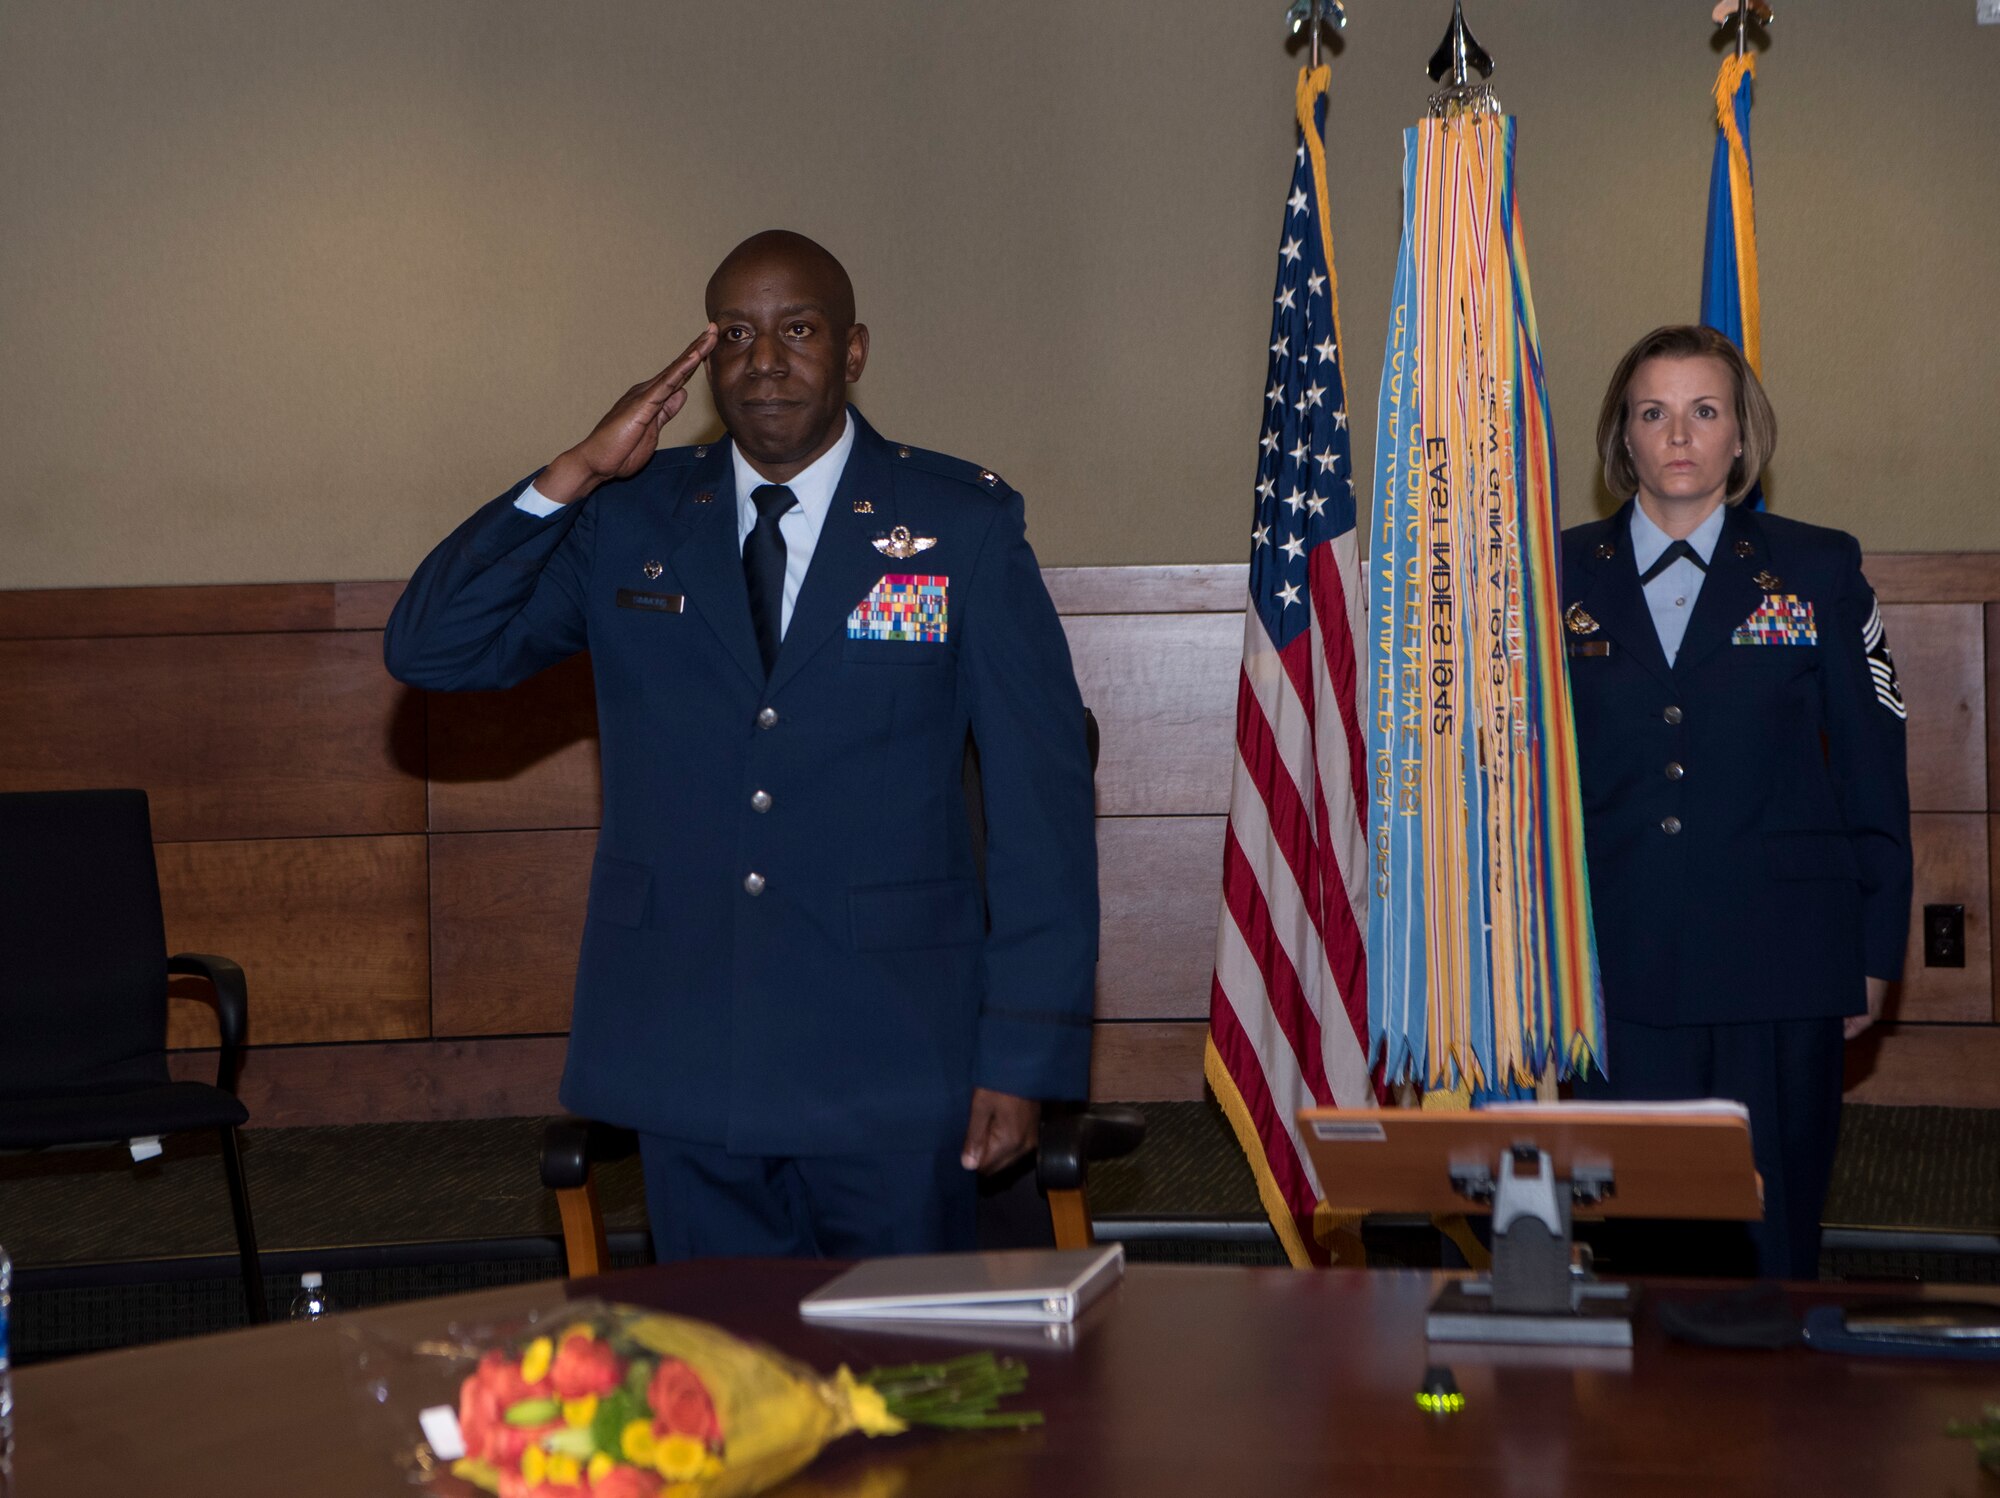 U.S. Air Force Col. Travolis Simmons renders his first salute as the new 3rd Wing commander during the 3rd WG change of command ceremony at Joint Base Elmendorf-Richardson, Alaska, July 17, 2020. The 3rd WG provides trained and equipped tactical air dominance forces, command and control platforms, and strategic and tactical airlift resources for contingency operations and also provides immediate early airborne detection, warning, surveillance and interception of hostile forces within the Alaskan North American Aerospace Defense Command Region. The ceremony was adapted to comply with COVID-19 health and safety measures.